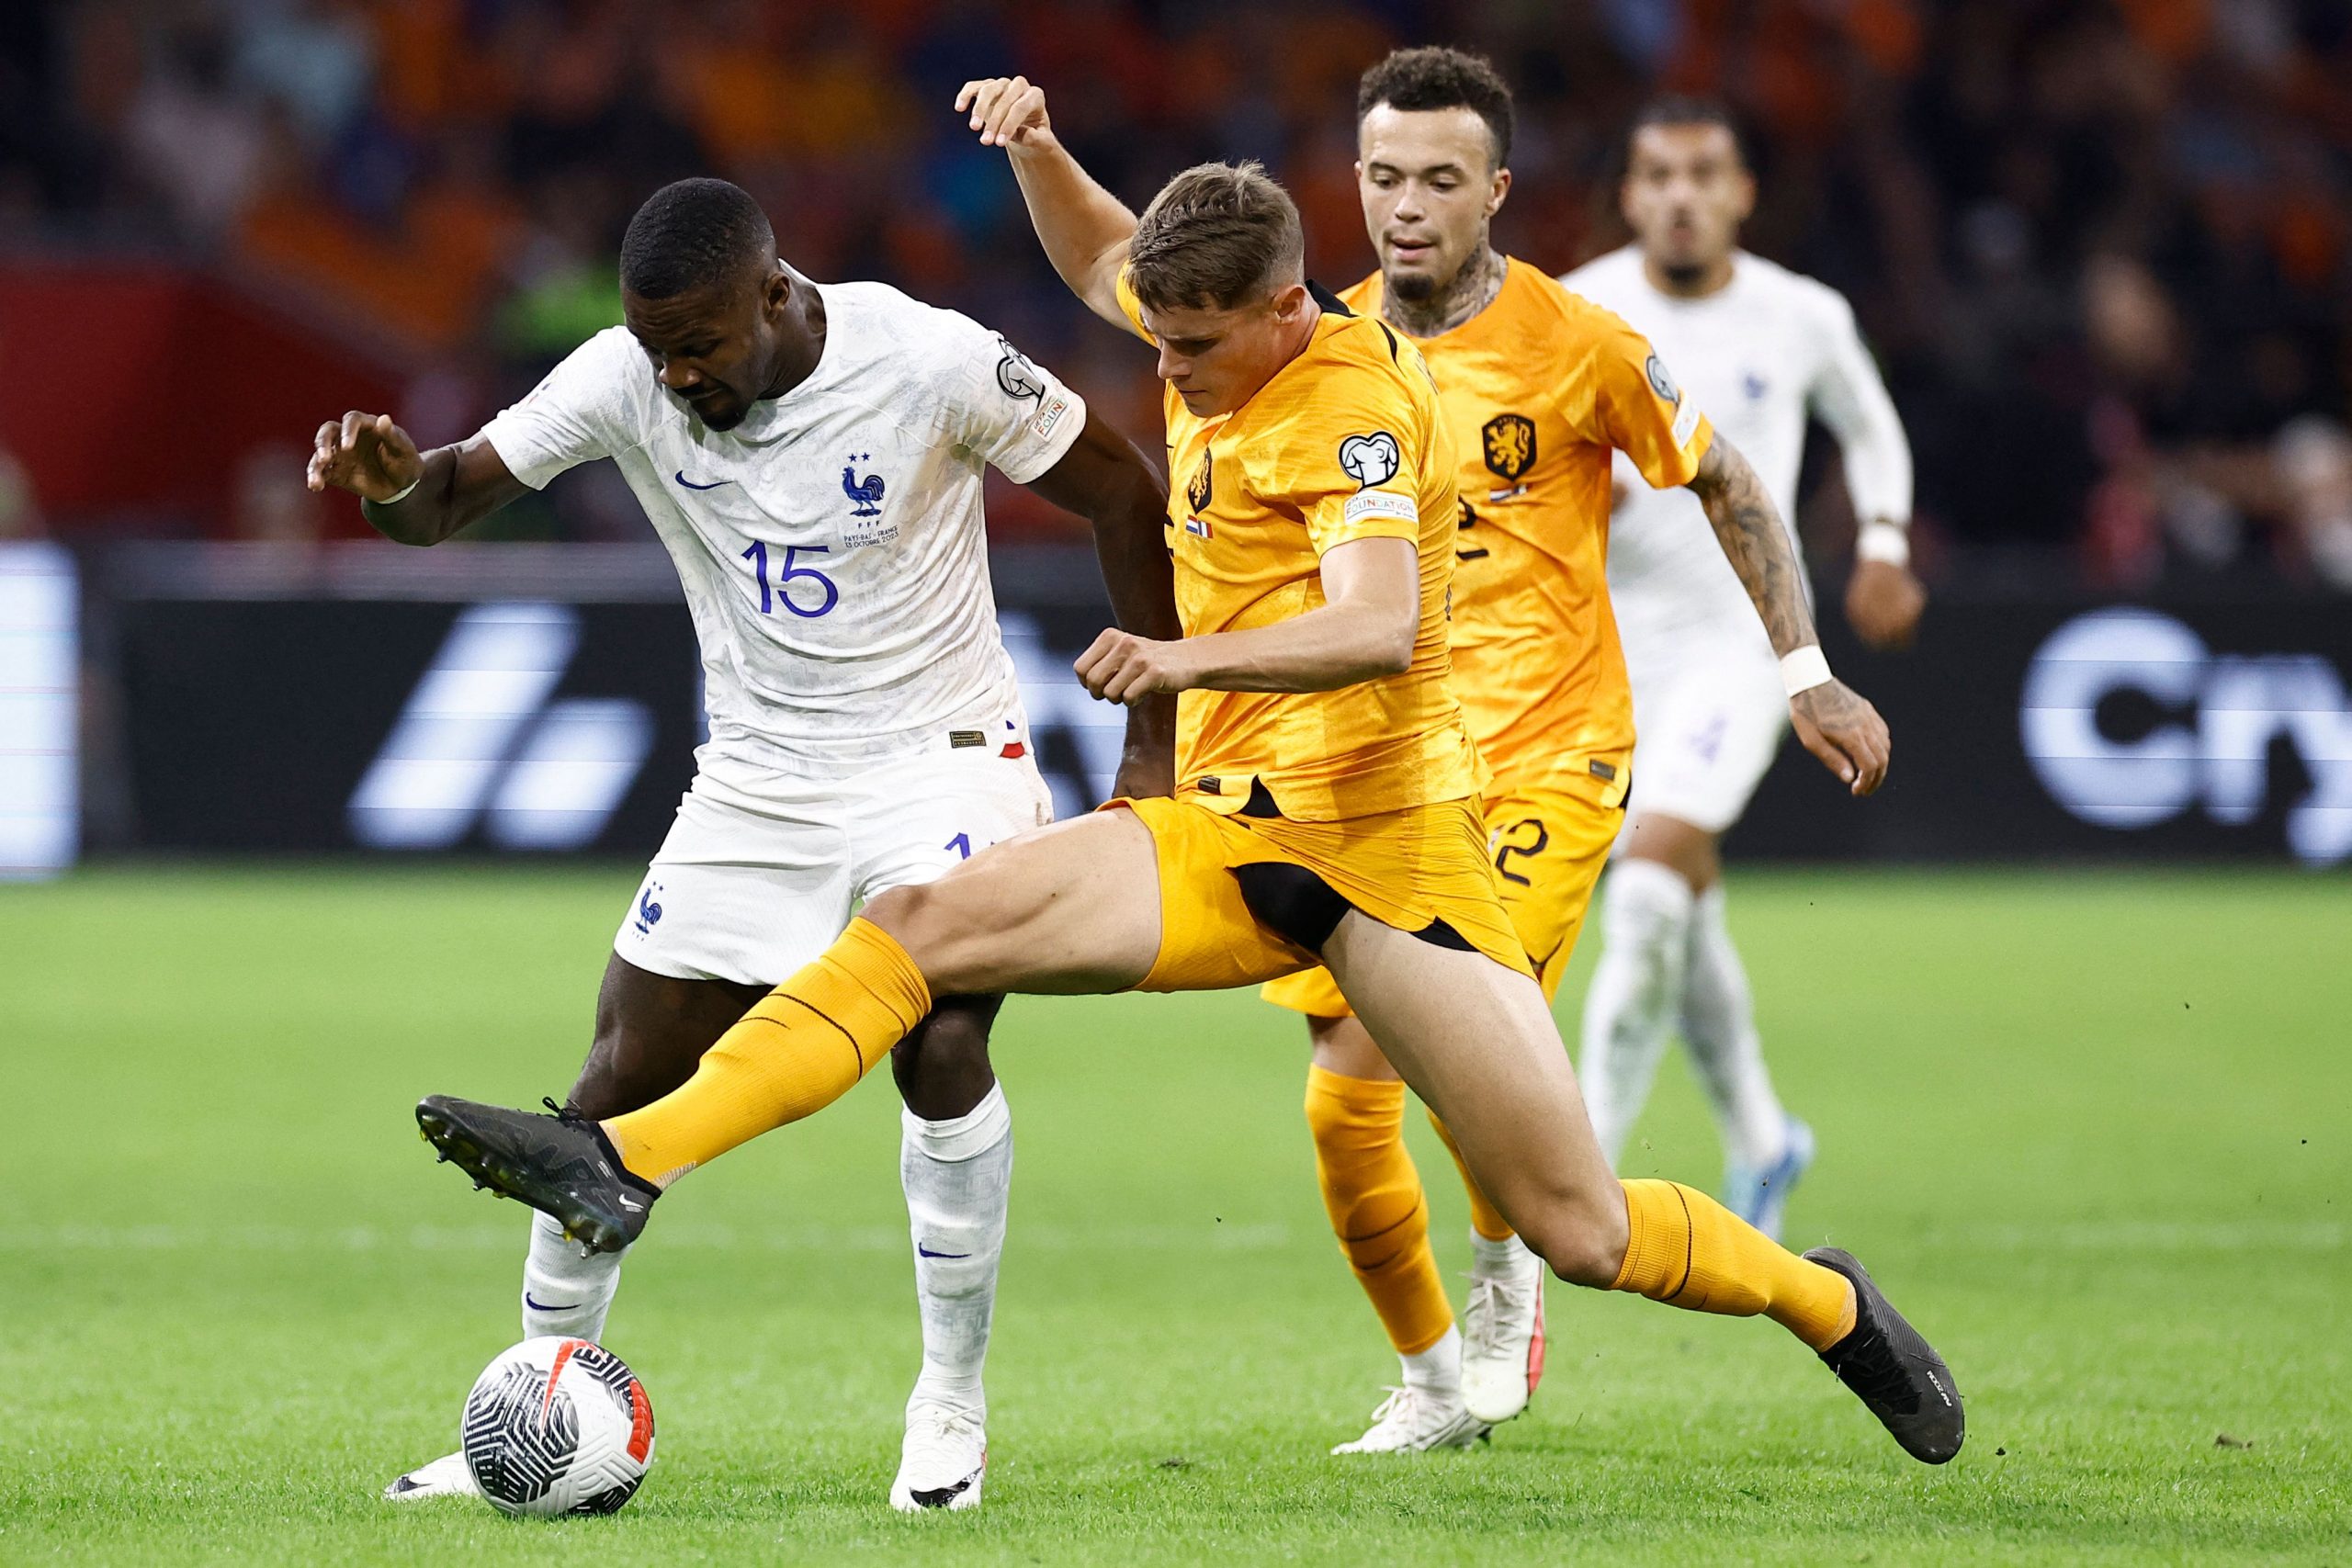 France's forward Marcus Thuram (L) fights for the ball with Netherlands' defender Micky van de Ven. (Photo by KENZO TRIBOUILLARD/AFP via Getty Images)